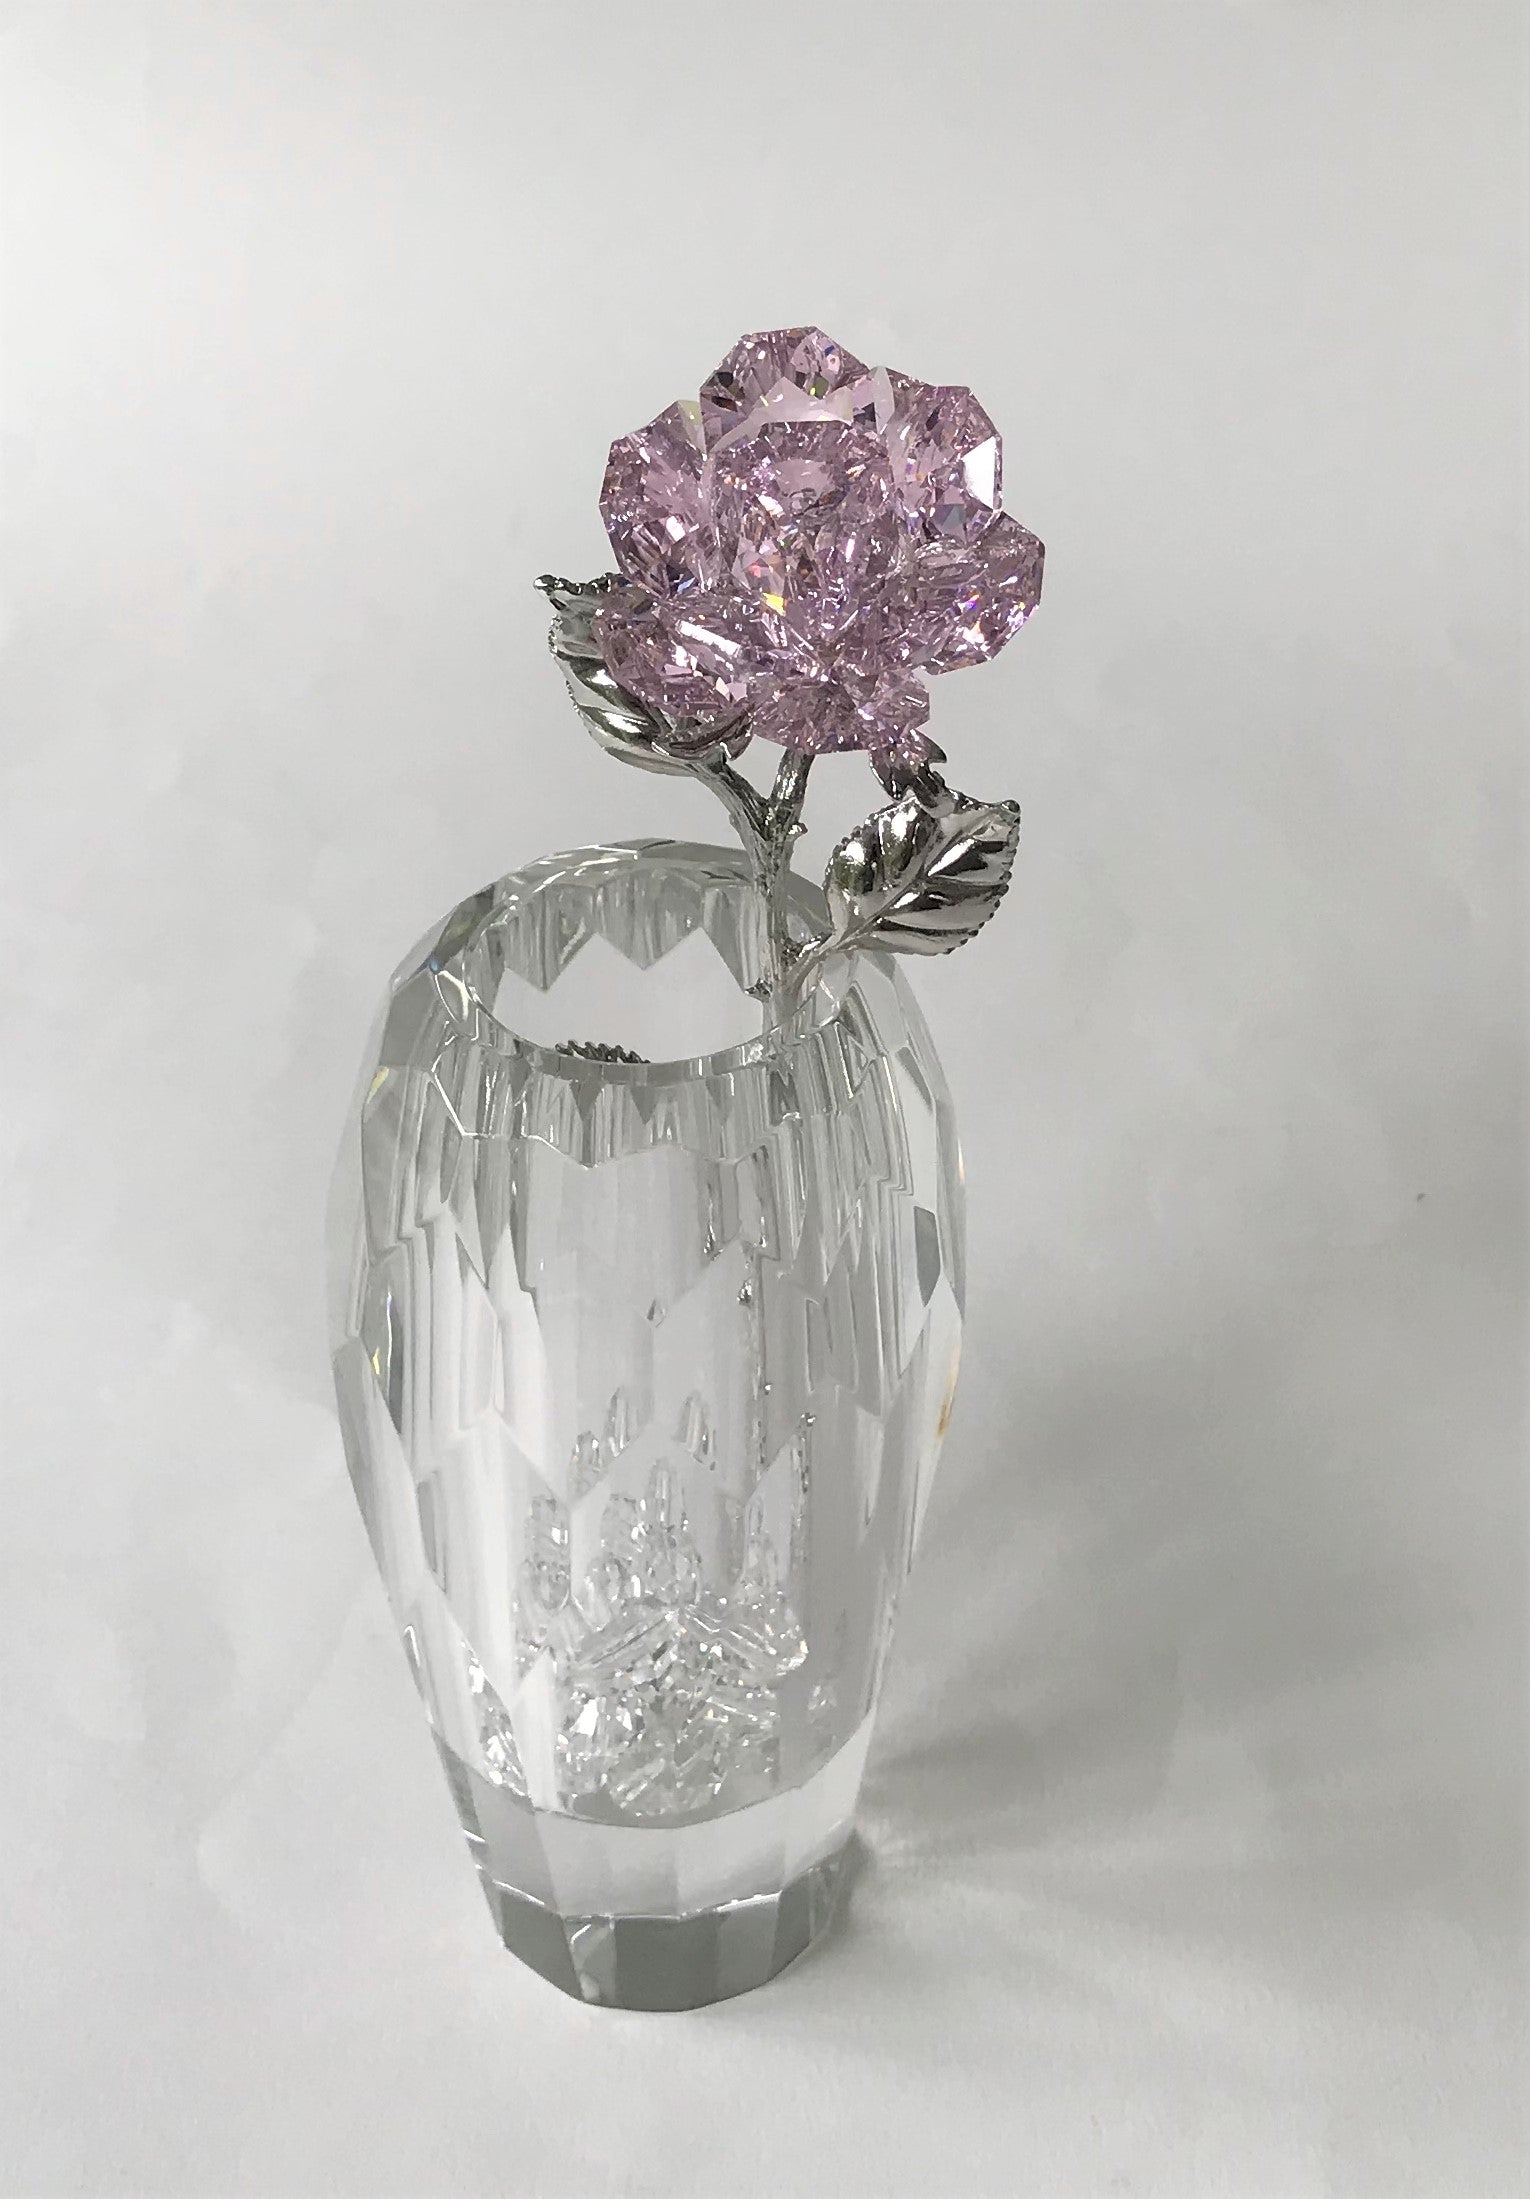 Pink Crystal Rose Handcrafted By Bjcrystalgifts Using Swarovski Crystals In A Faceted Crystal Vase